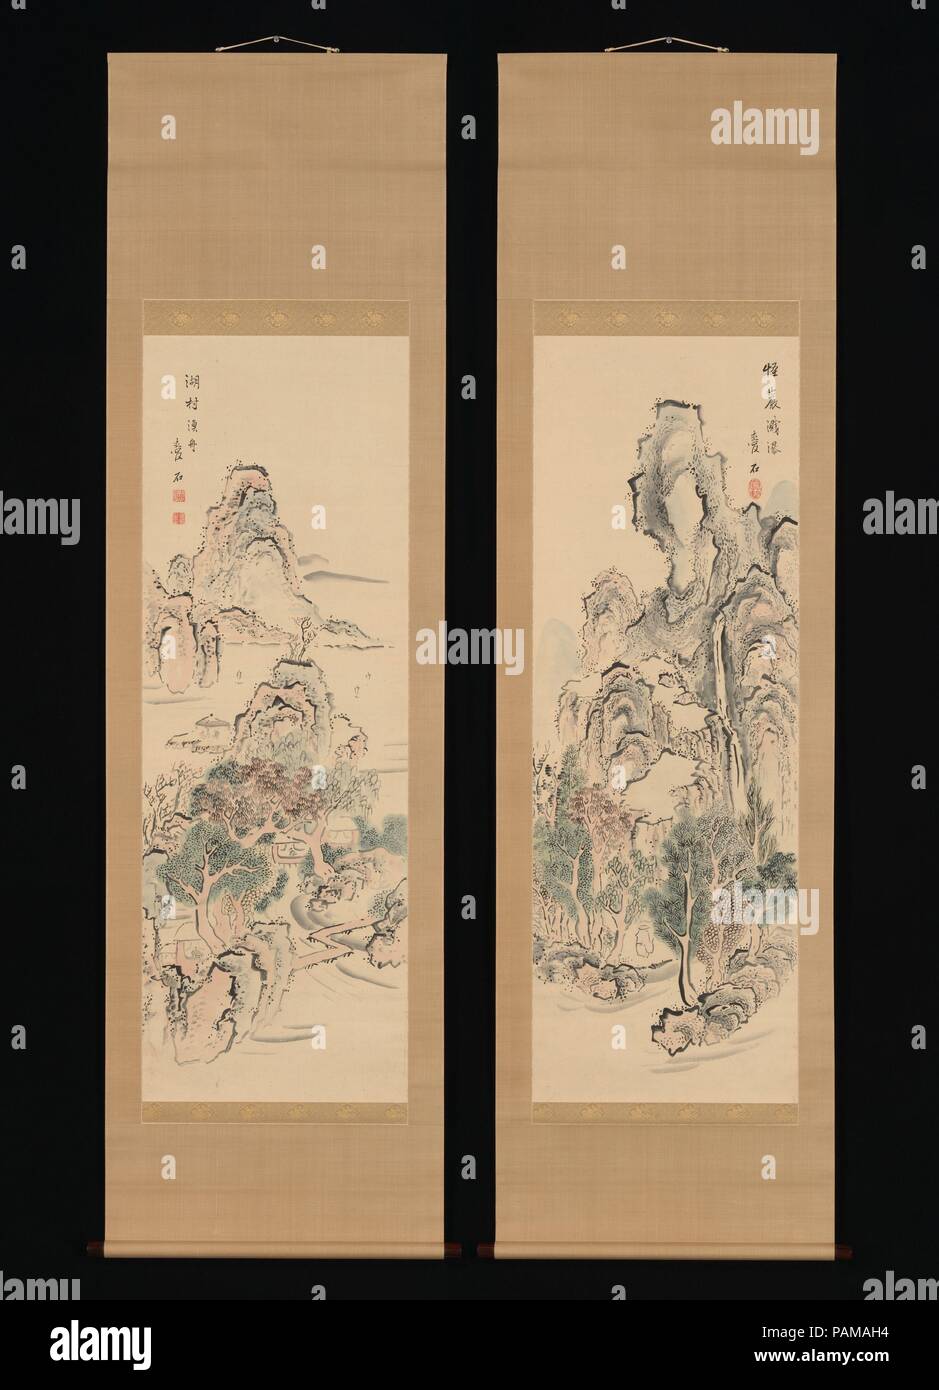 Fantastic Rocks with Cascading Waterfall; Fishing Boats by a Lake Hamlet. Artist: Aiseki (Japanese, active first half of the 19th century). Culture: Japan. Dimensions: Image (a): 51 3/4 × 17 15/16 in. (131.5 × 45.5 cm)  Overall with mounting (a): 81 1/2 × 22 15/16 in. (207 × 58.2 cm)  Overall with knobs (a): 81 1/2 × 25 1/16 in. (207 × 63.6 cm)  Image (b): 51 13/16 × 17 7/8 in. (131.6 × 45.4 cm)  Overall with mounting (b): 81 1/2 × 22 15/16 in. (207 × 58.2 cm)  Overall with knobs (b): 81 1/2 × 25 1/16 in. (207 × 63.7 cm). Date: first half of the 19th century. Museum: Metropolitan Museum of Art Stock Photo